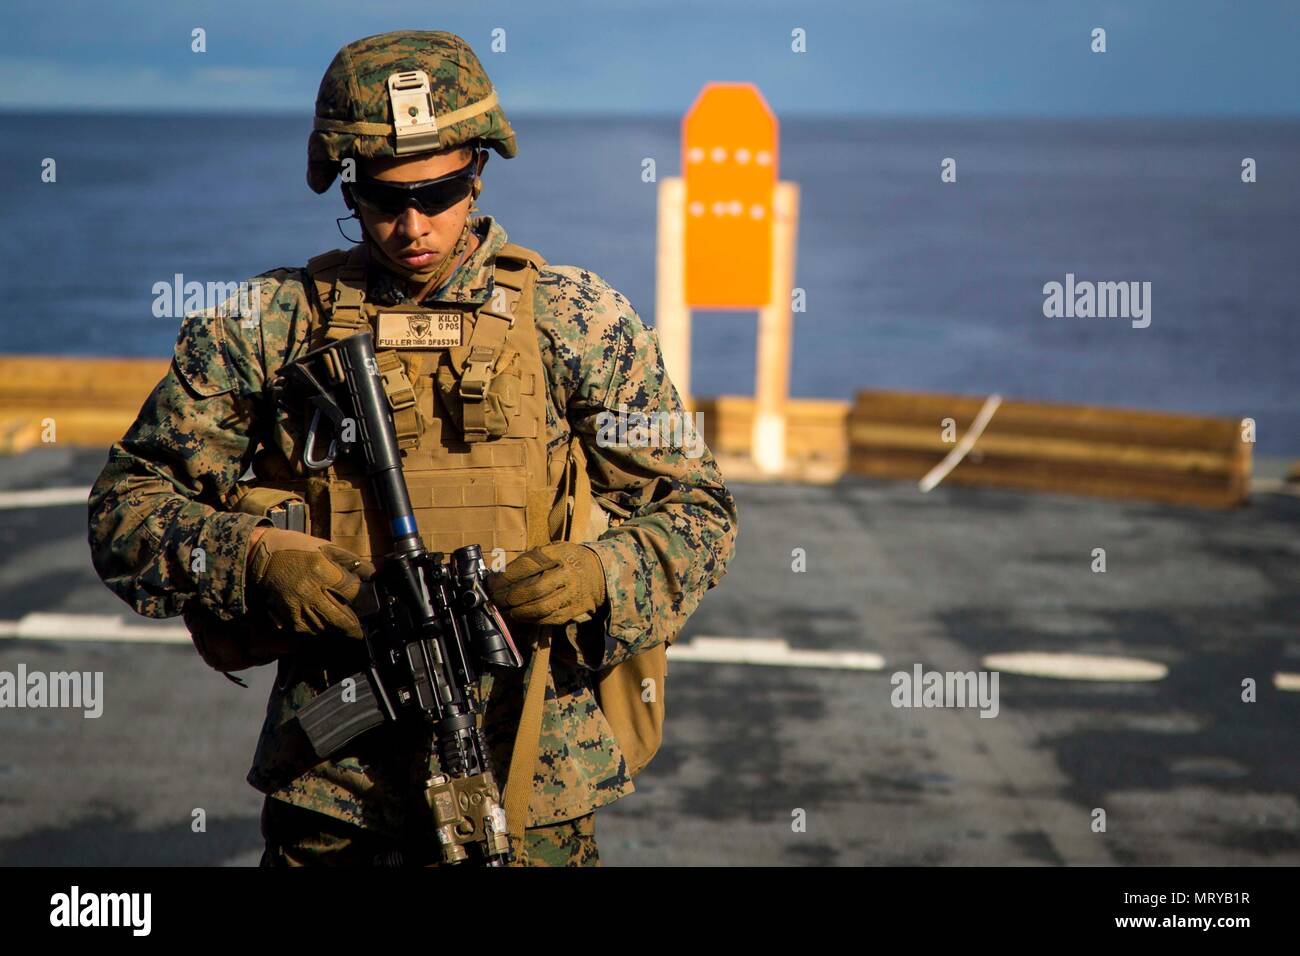 U.S. Marine Corps Lance Cpl. Daniel Fuller, an infantryman with Task Force Koa Moana 17, walks up range after analyzing his shot group during a live fire range aboard the USNS Sacagawea, July 13, 2017. Koa Moana 17 is designed to improve interoperability with our partners, enhance military-to-military relations, and expose the Marine Corps forces to different types of terrain for familiarity in the event of a natural disaster in the region.   (U.S. Marine Corps photo by MCIPAC Combat Camera Lance Cpl. Juan C. Bustos) Stock Photo